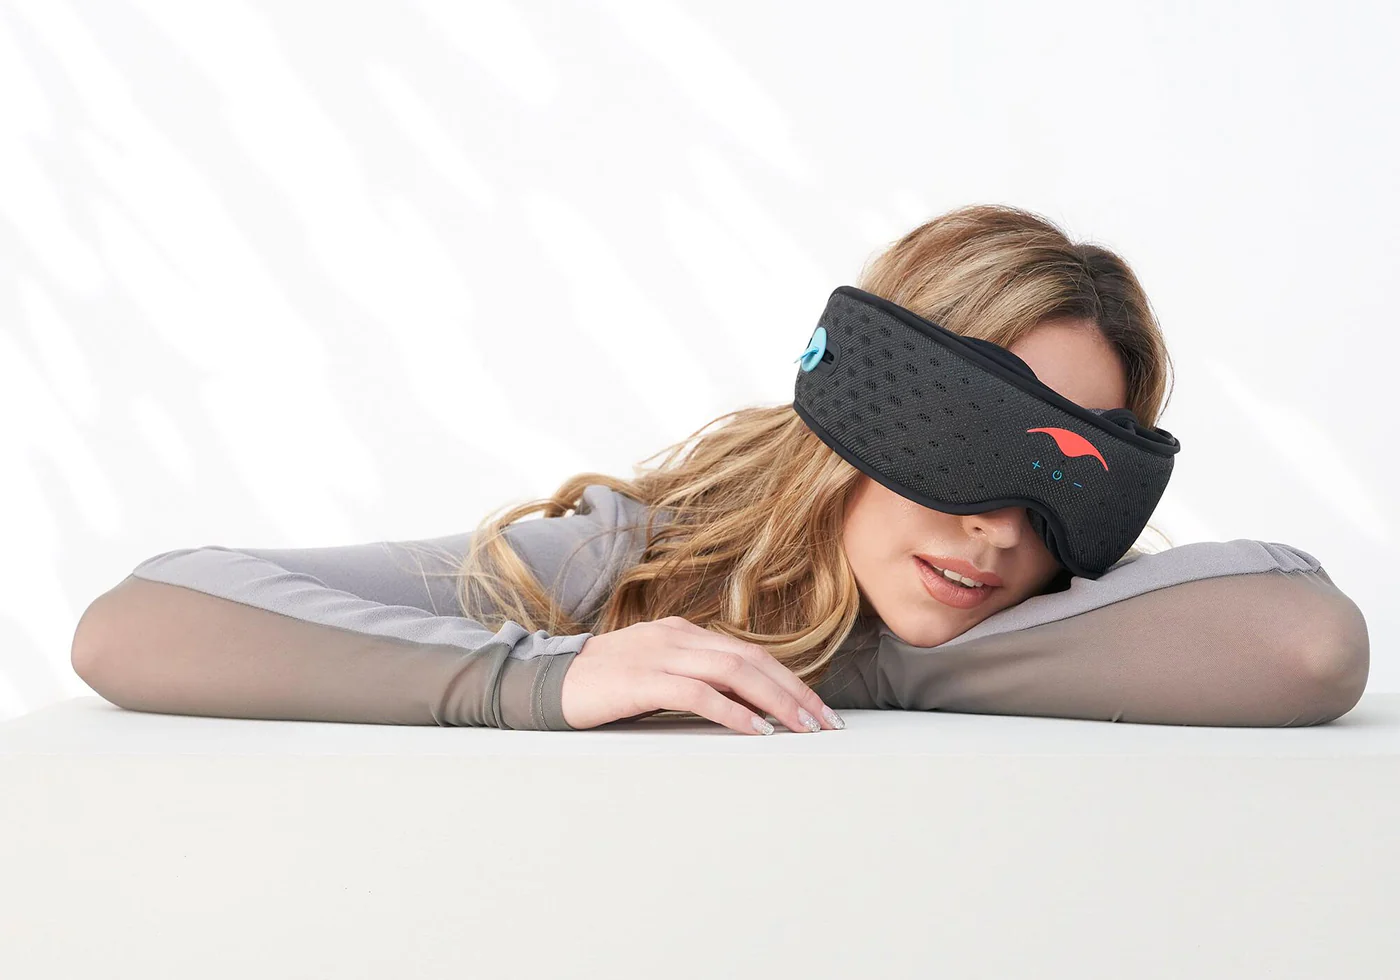 A blonde girl napping on her arms wearing a black Bluetooth sleep mask with headphones.